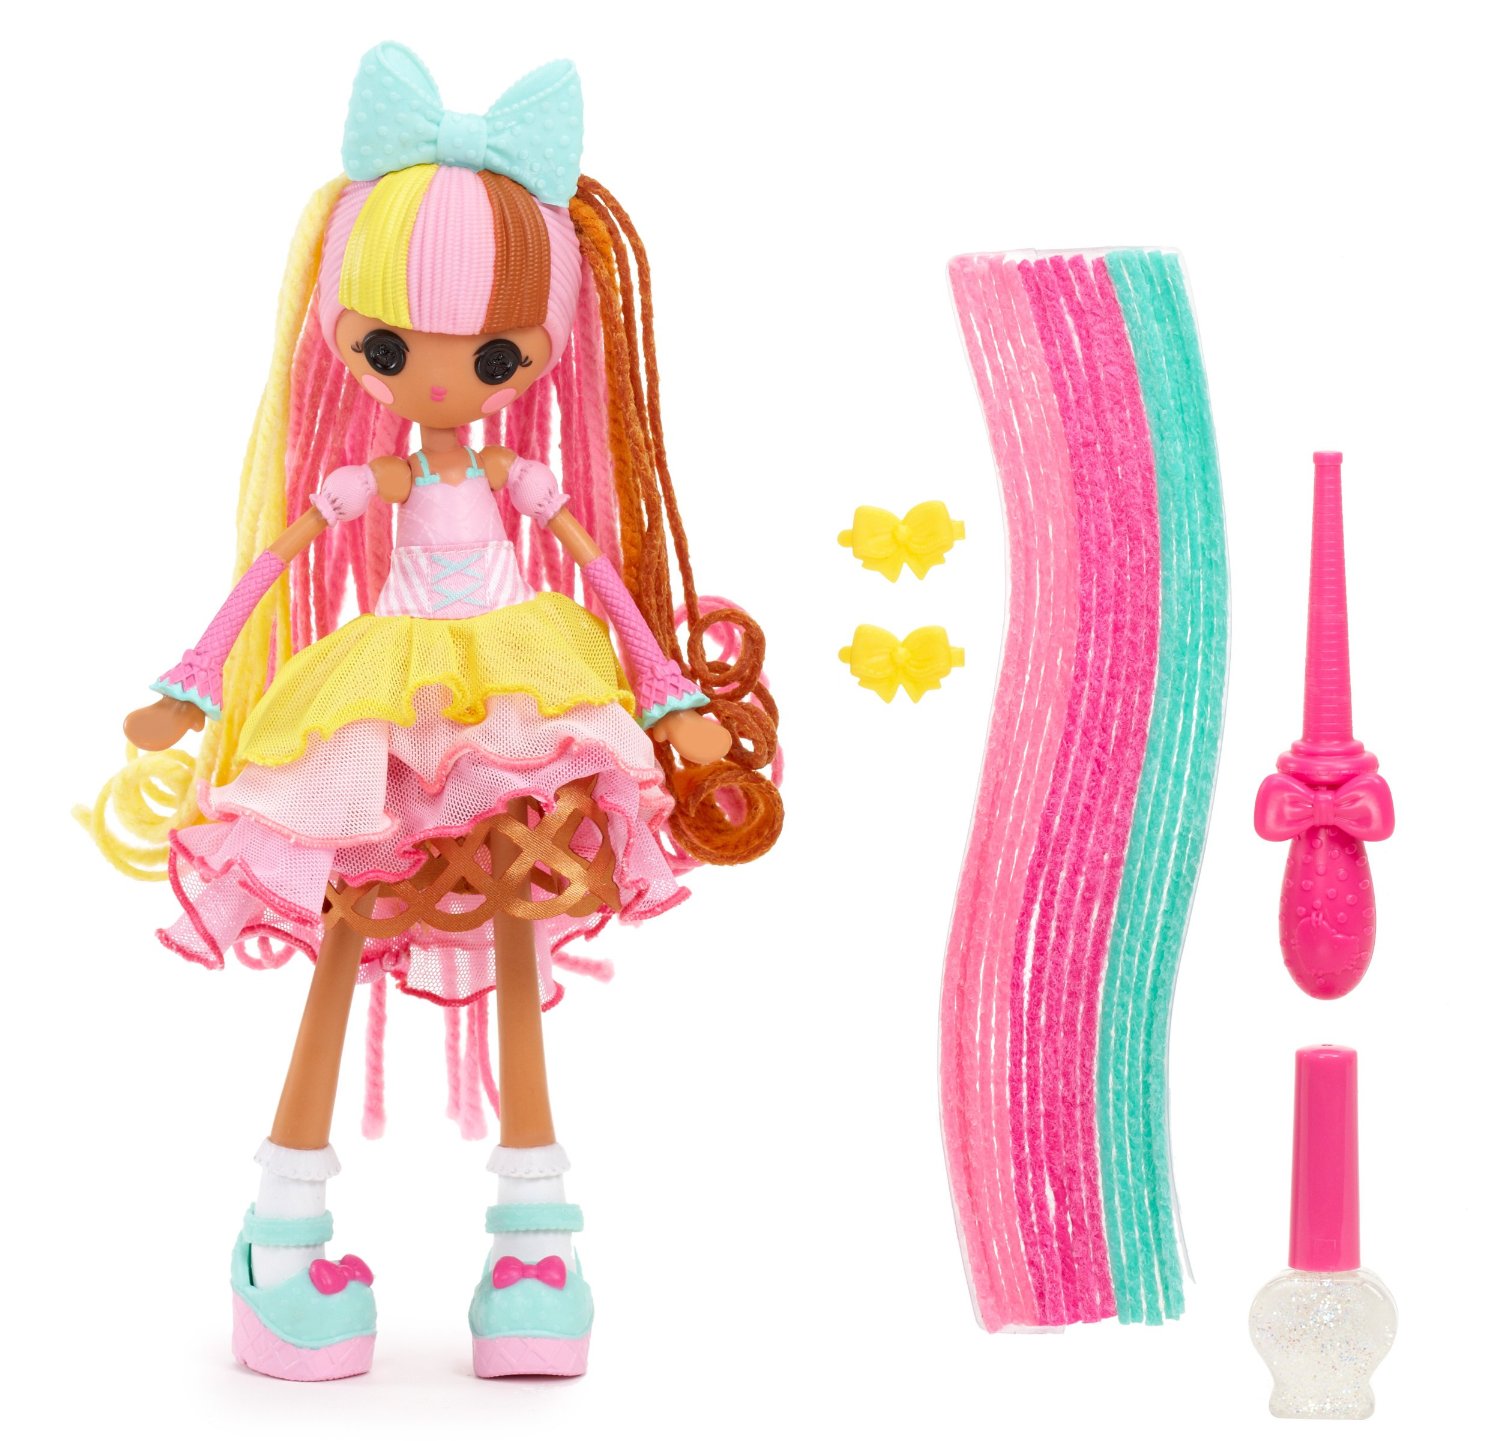 Lalaloopsy Girls Crazy Hair Doll Scoops Waffle Cone - Lalaloopsy Girls Crazy Hair Scoops Waffle Cone , HD Wallpaper & Backgrounds